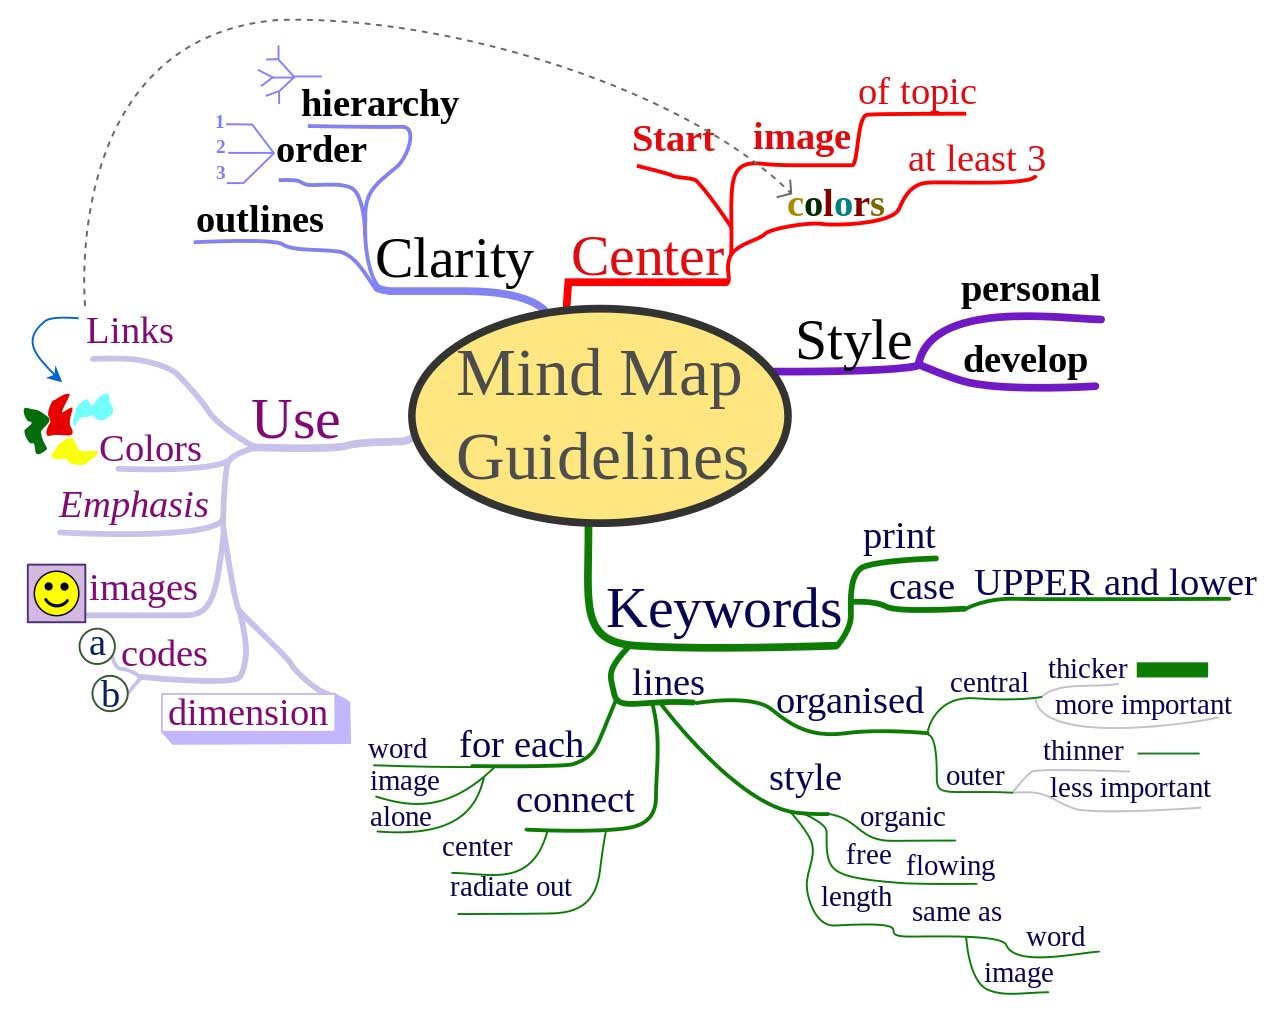 Mind map guidelines